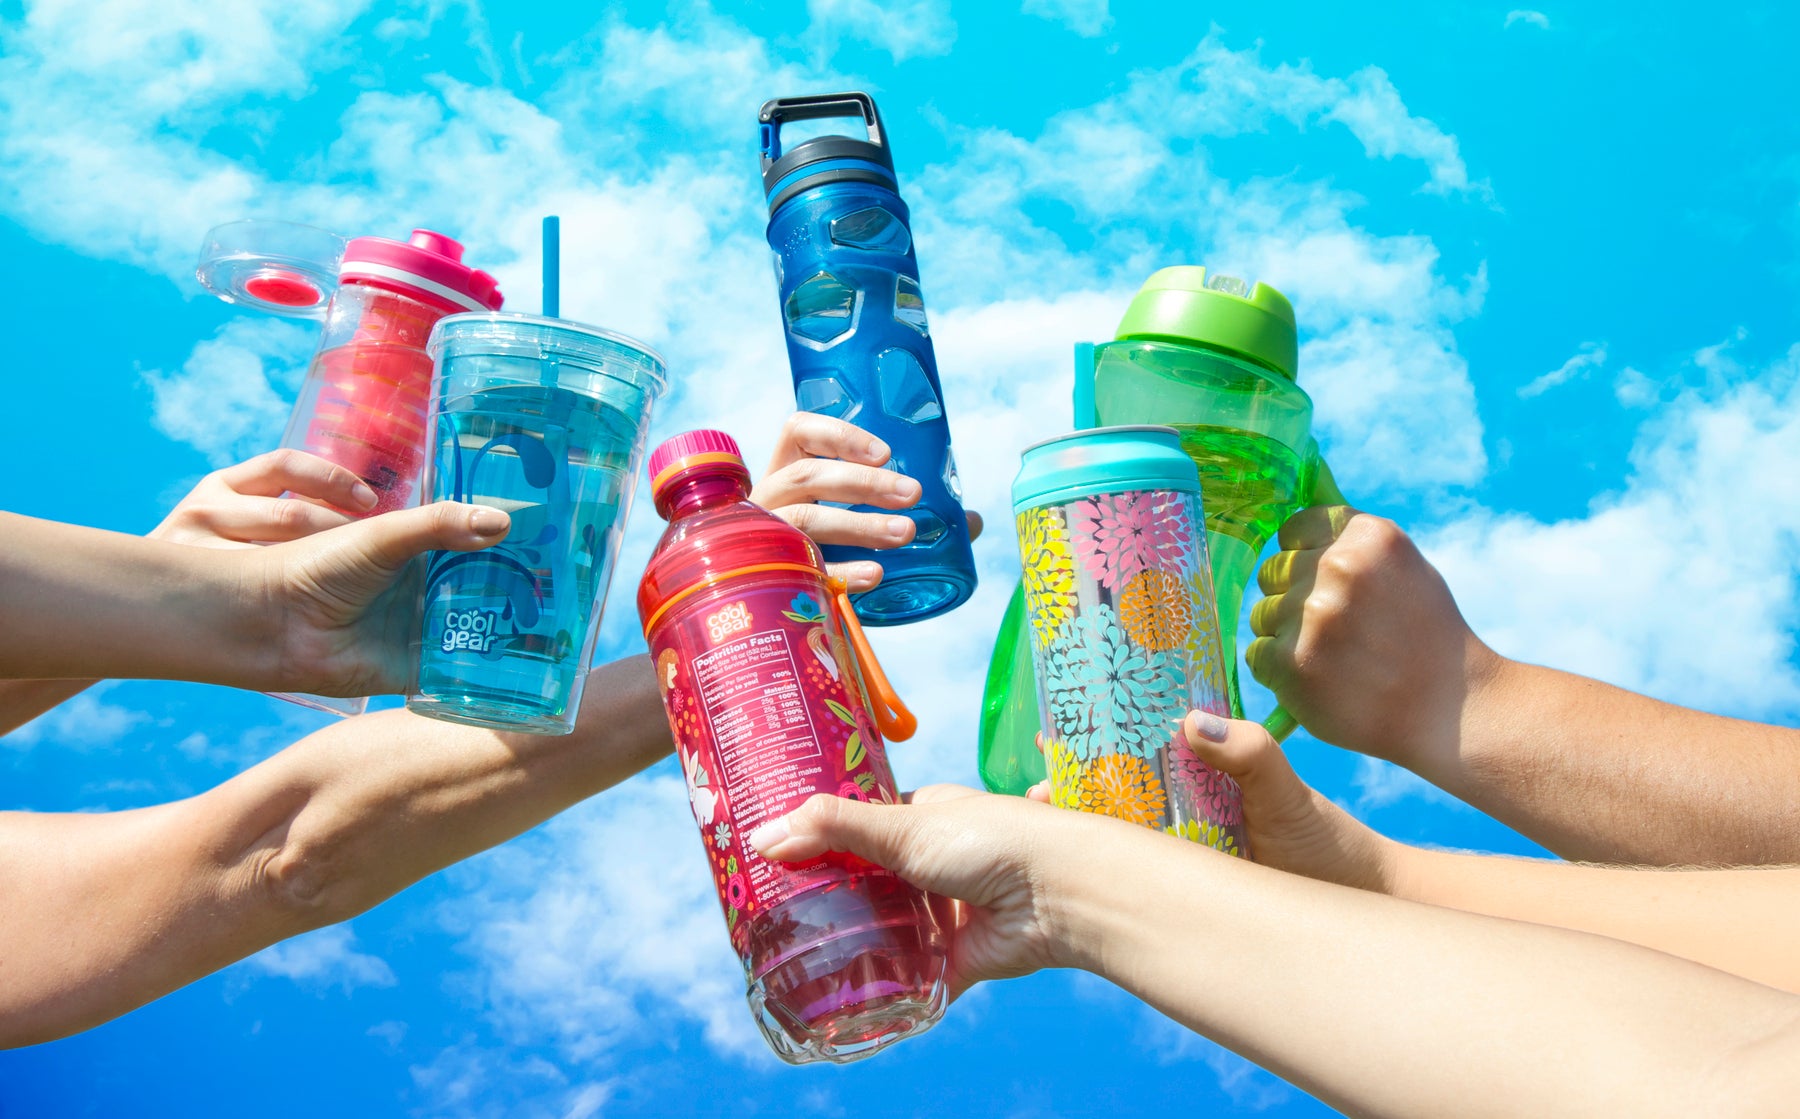 Cool Gear  Water Bottles, Tumblers, Drink Cans, Travel Mugs